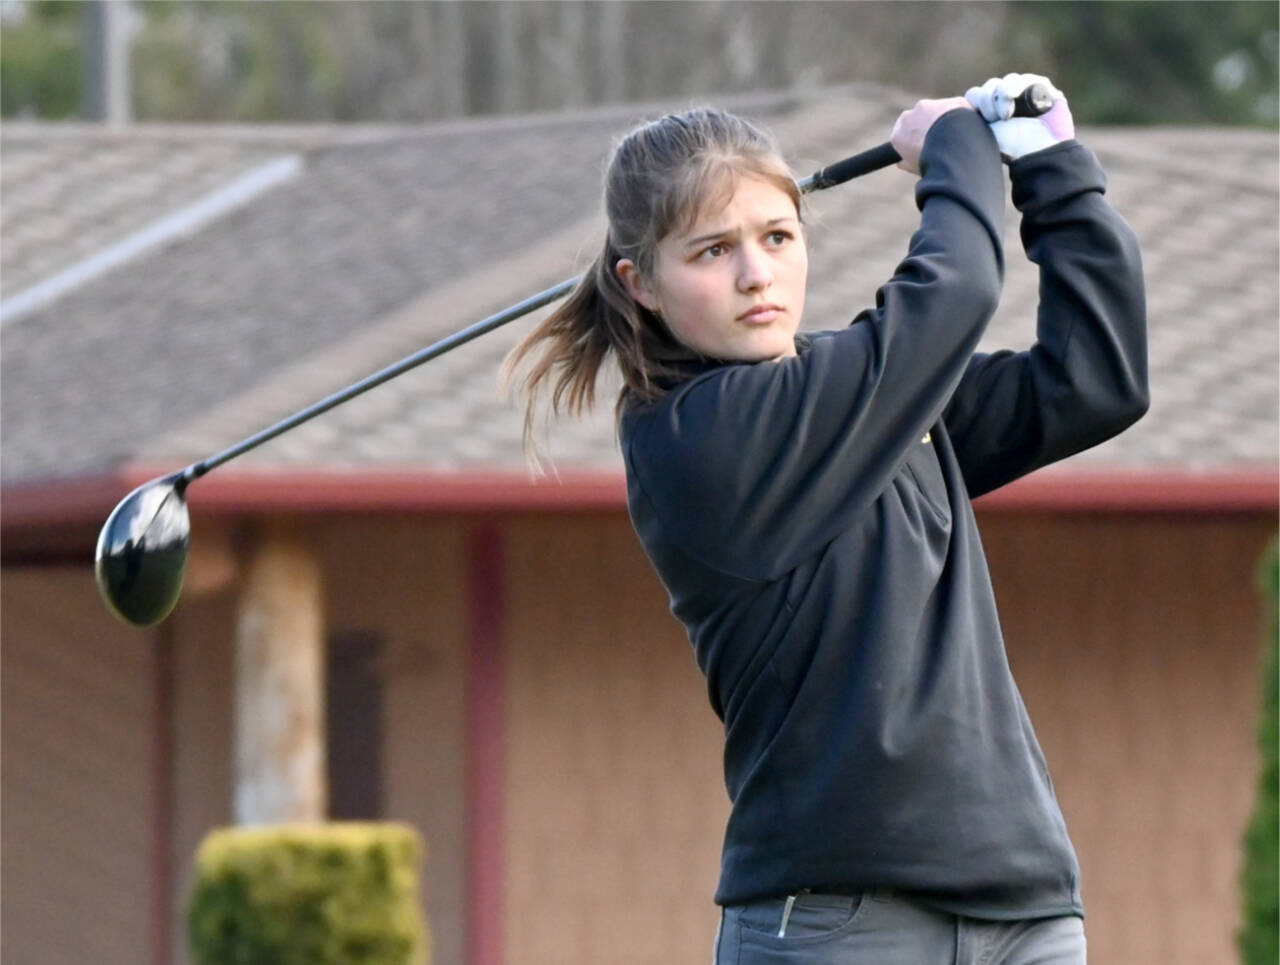 Sequim's Raimey Brewer qualified for the 2A state girls golf tournament. Here, she is competing earlier in the season against Bainbridge. (Michael Dashiell/Olympic Peninsula News Group)